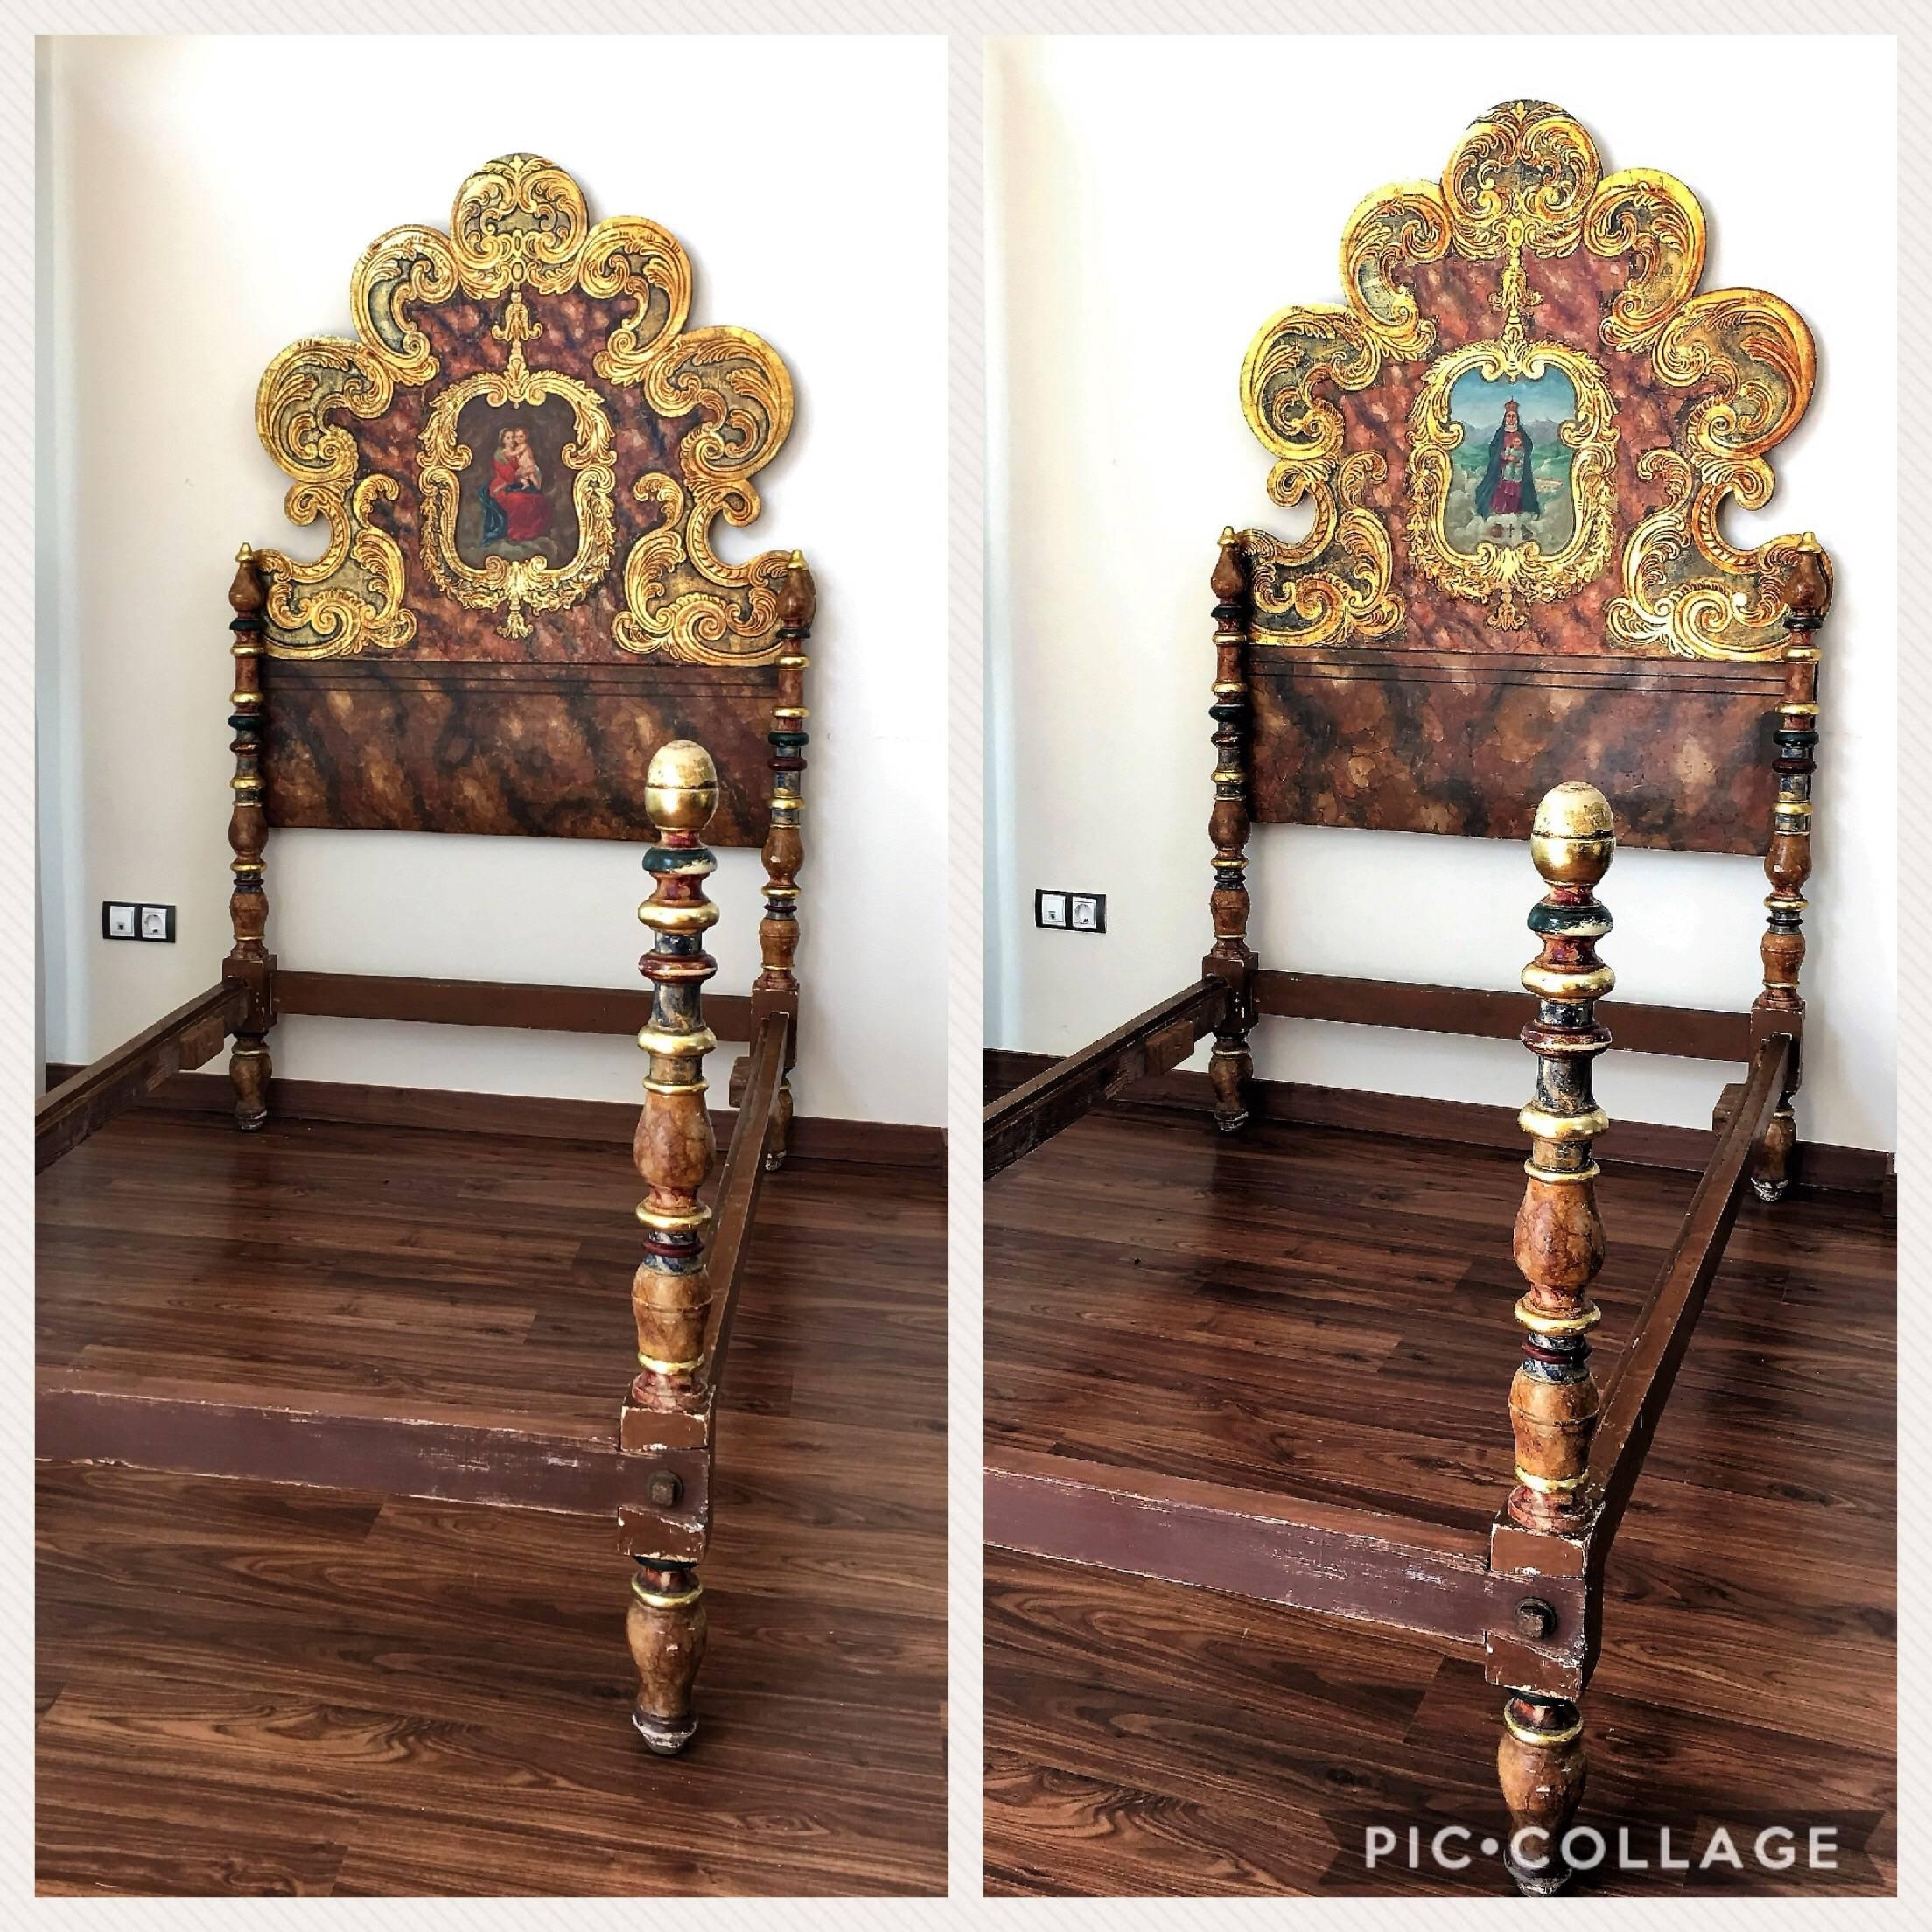 18th century pair of full beds panel in polychromed and giltwood from Spain
The headboards are hand painted with a two different religious scenes Virgin and Christ child.